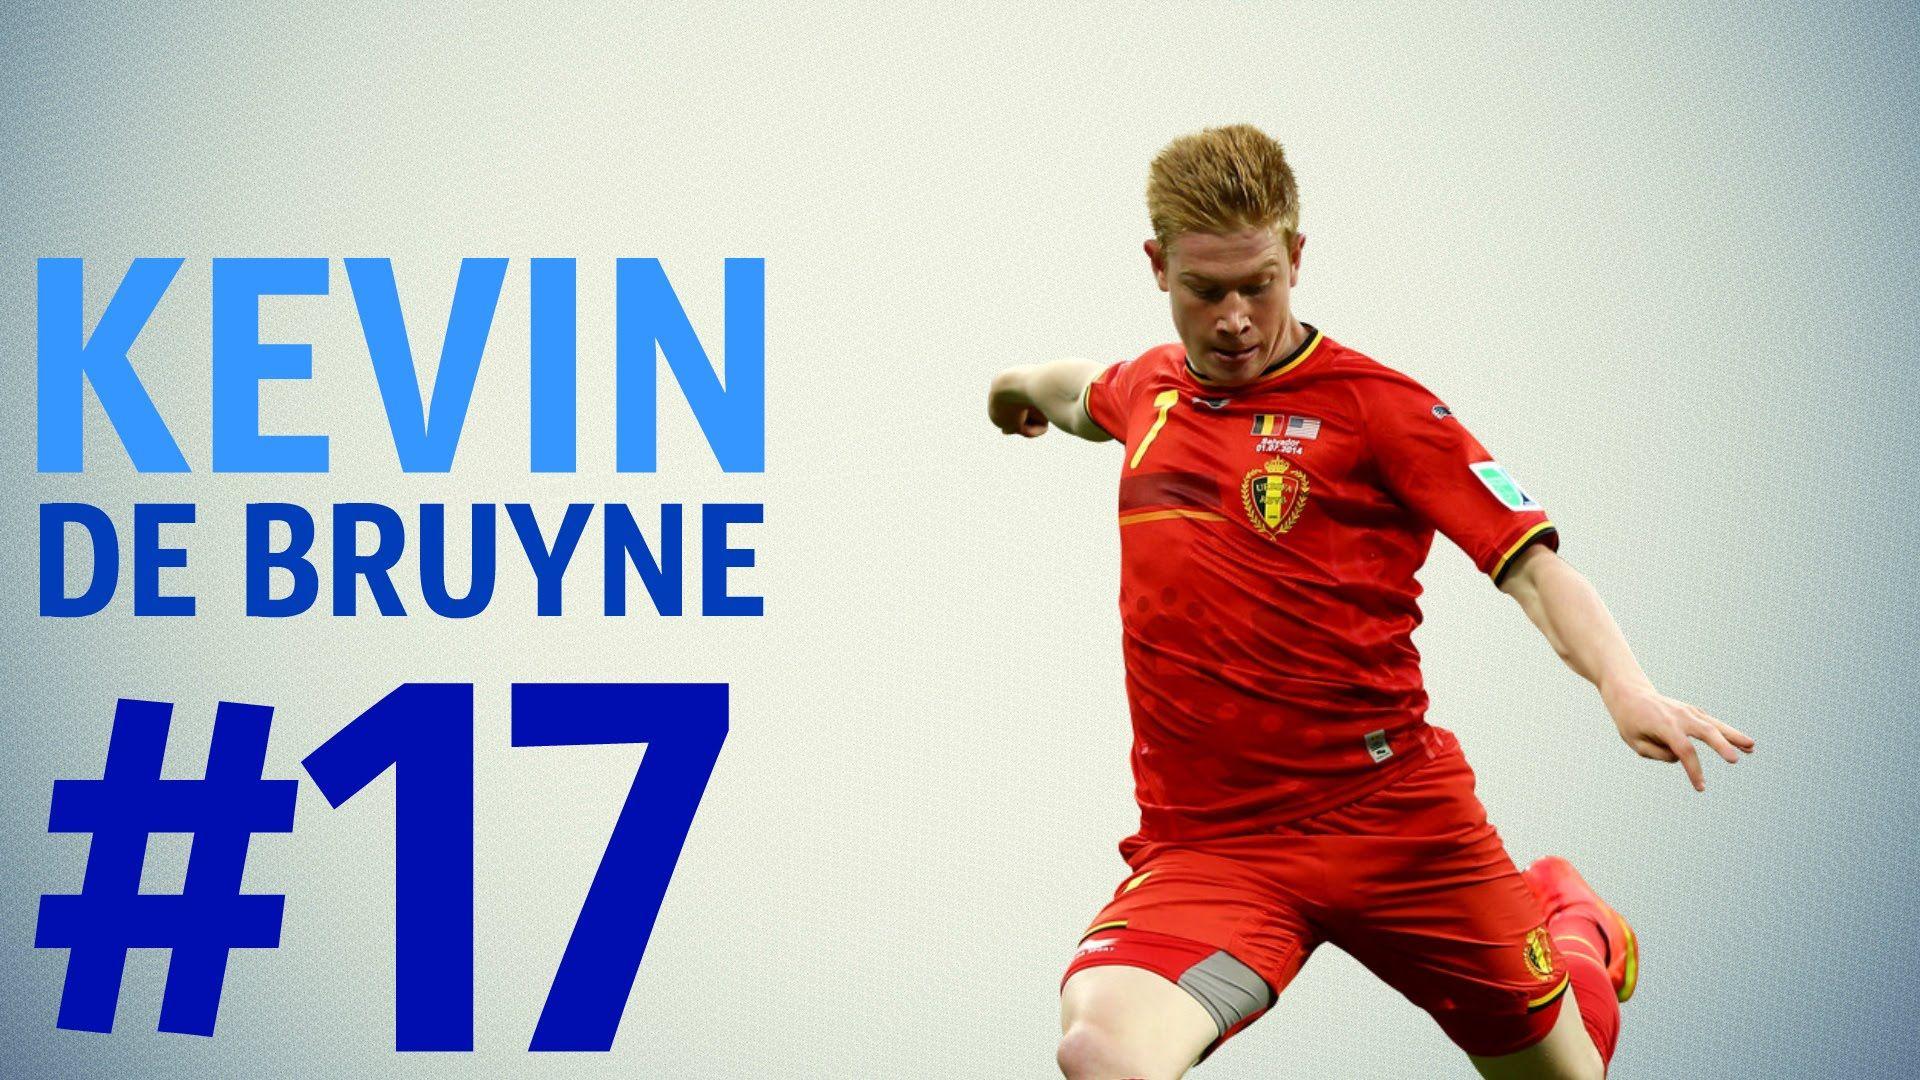 Kevin De Bruyne GOALS & SKILLS Welcome to Manchester City!